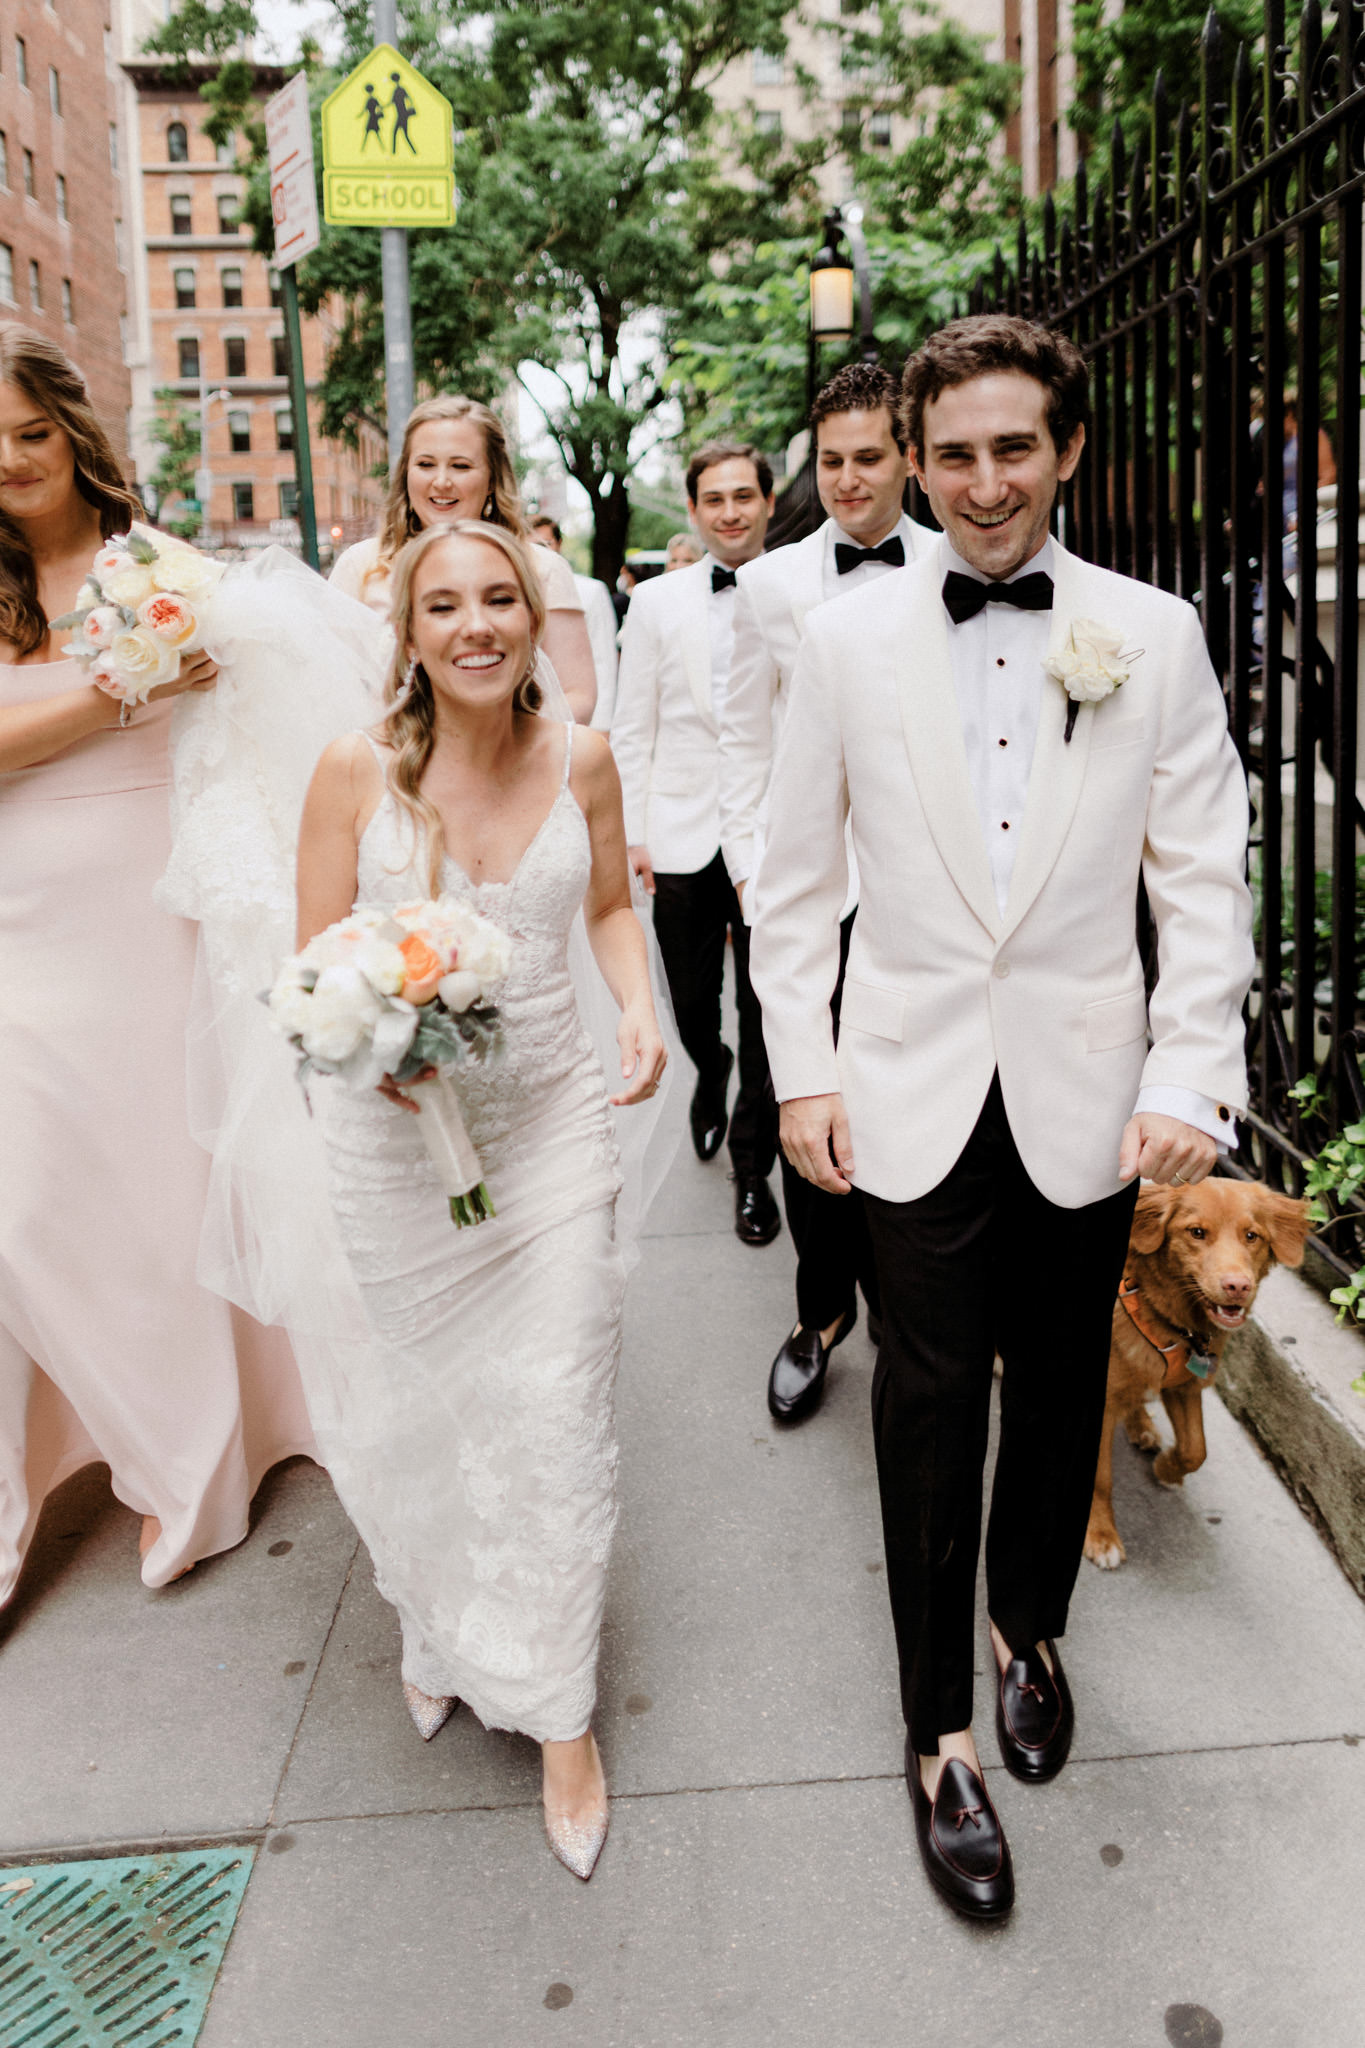 Newlyweds walk down a street with their wedding party in New York City